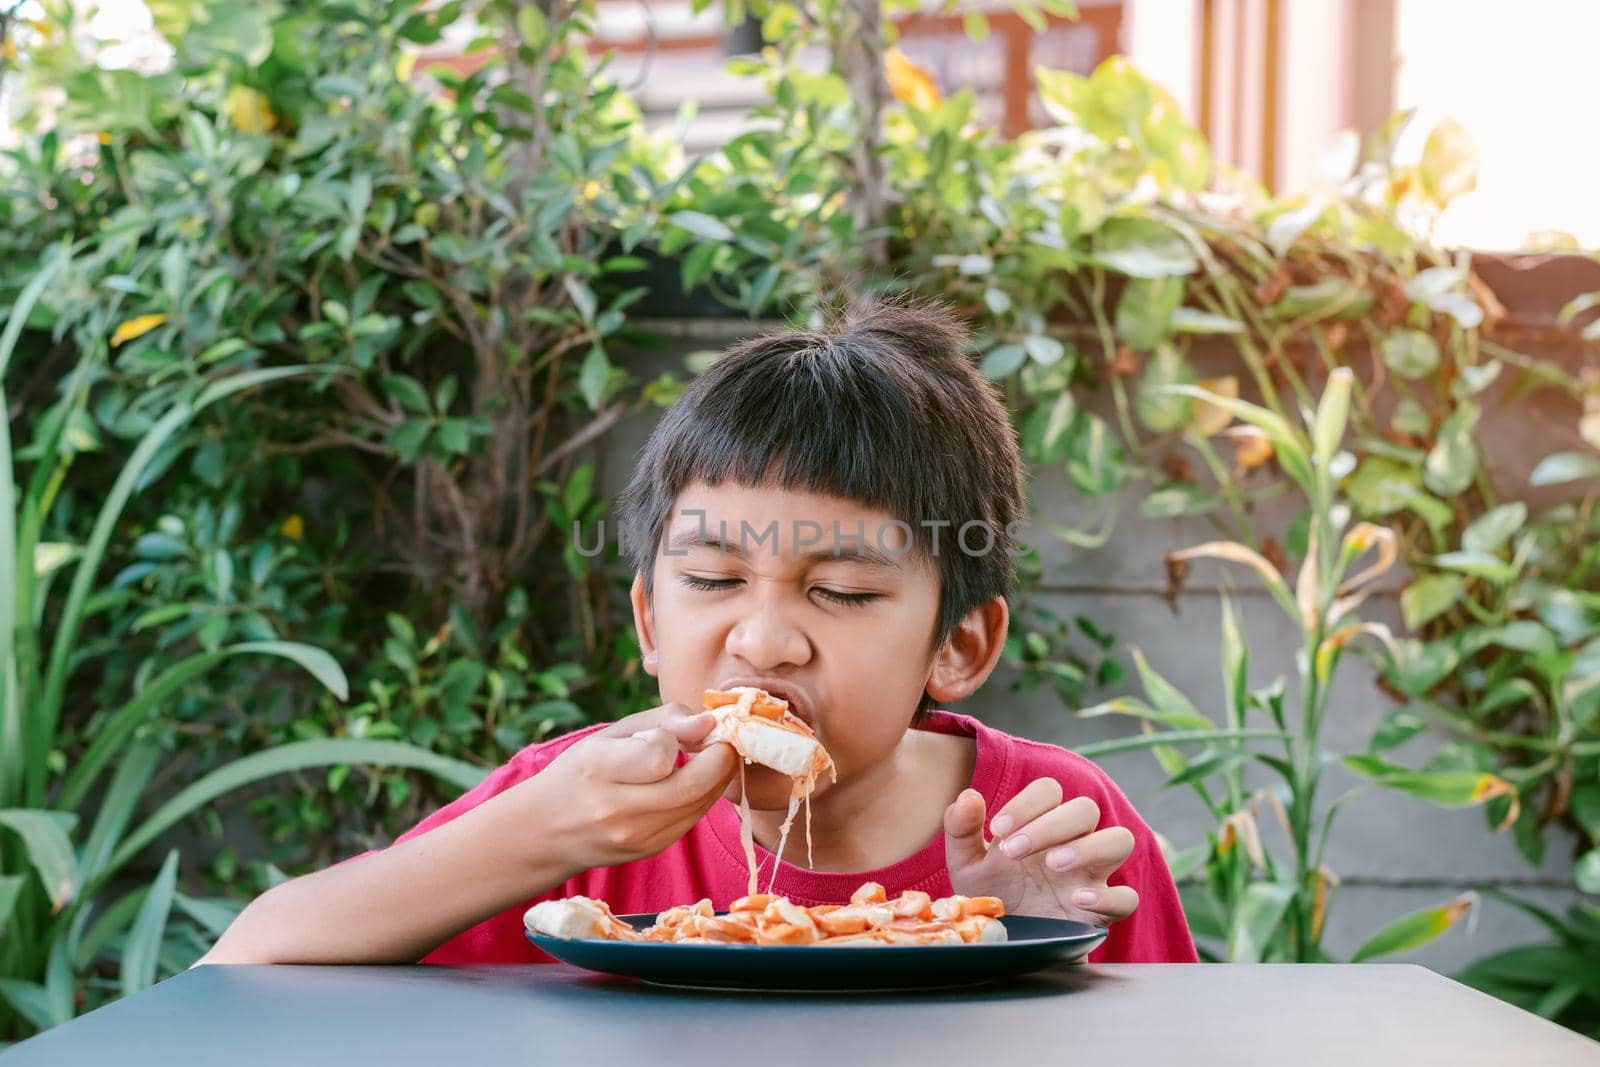 Asian cute boy in red shirt eating pizza deliciously and happily.